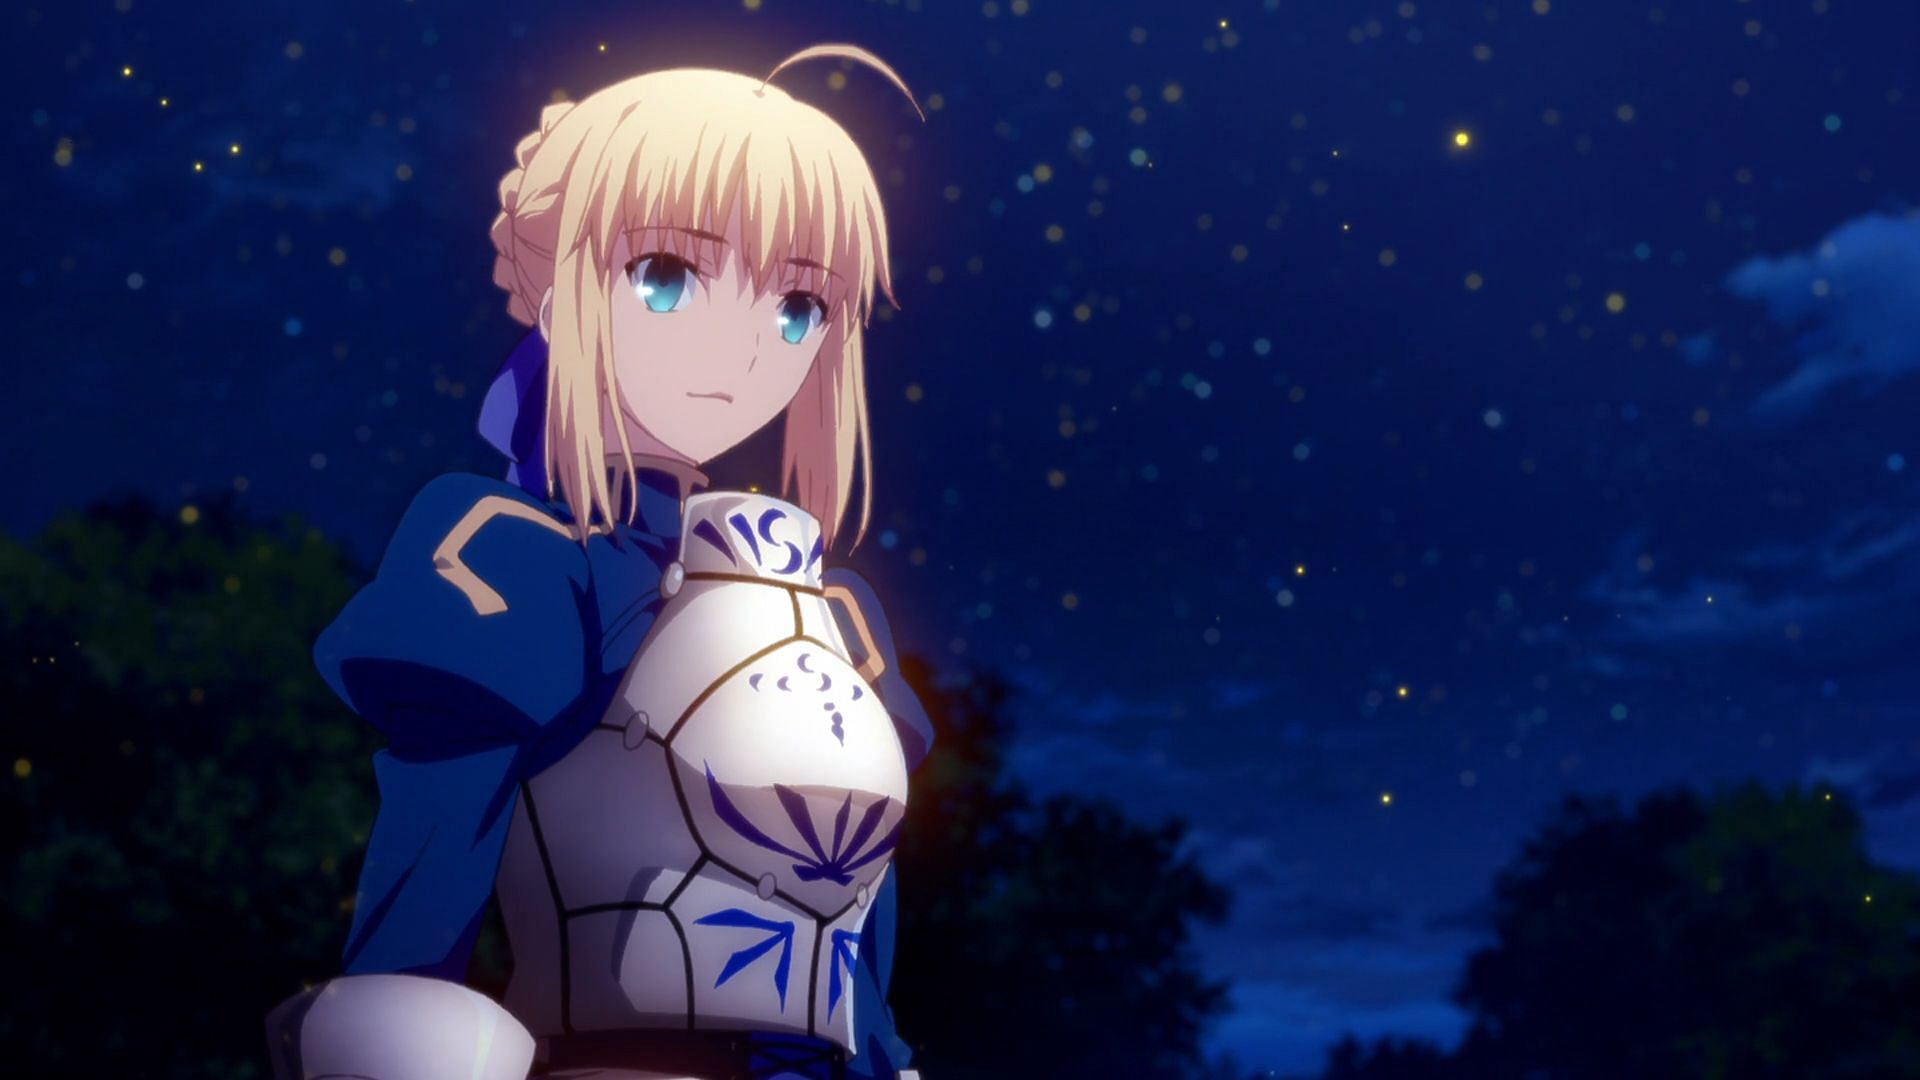 Saber as seen in the anime Fate/Stay Night (Image via Studio Deen)